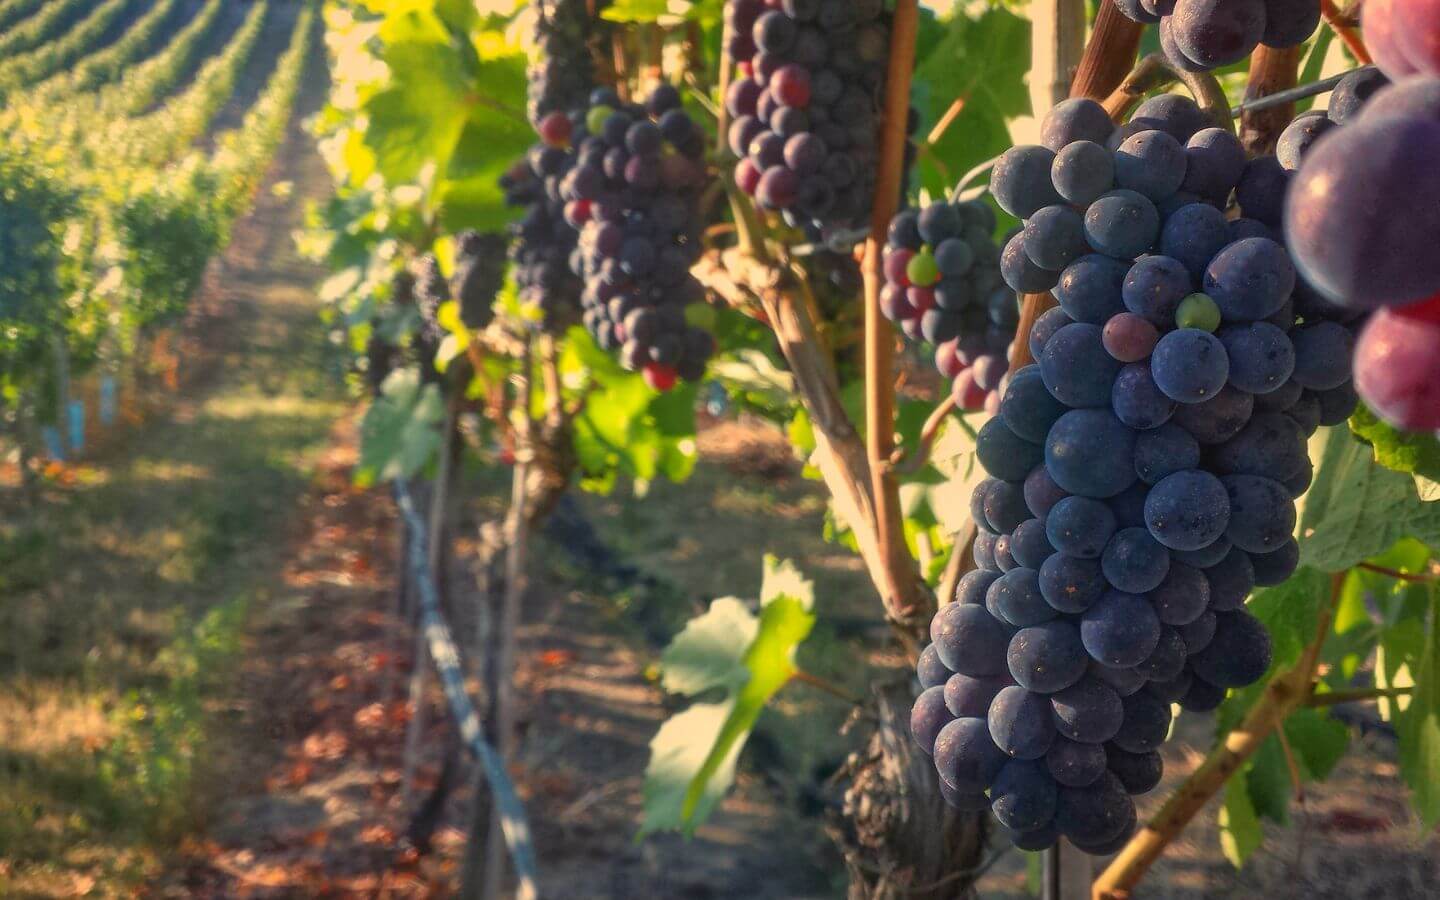 The sun shining on ripe red grapes in a vineyard